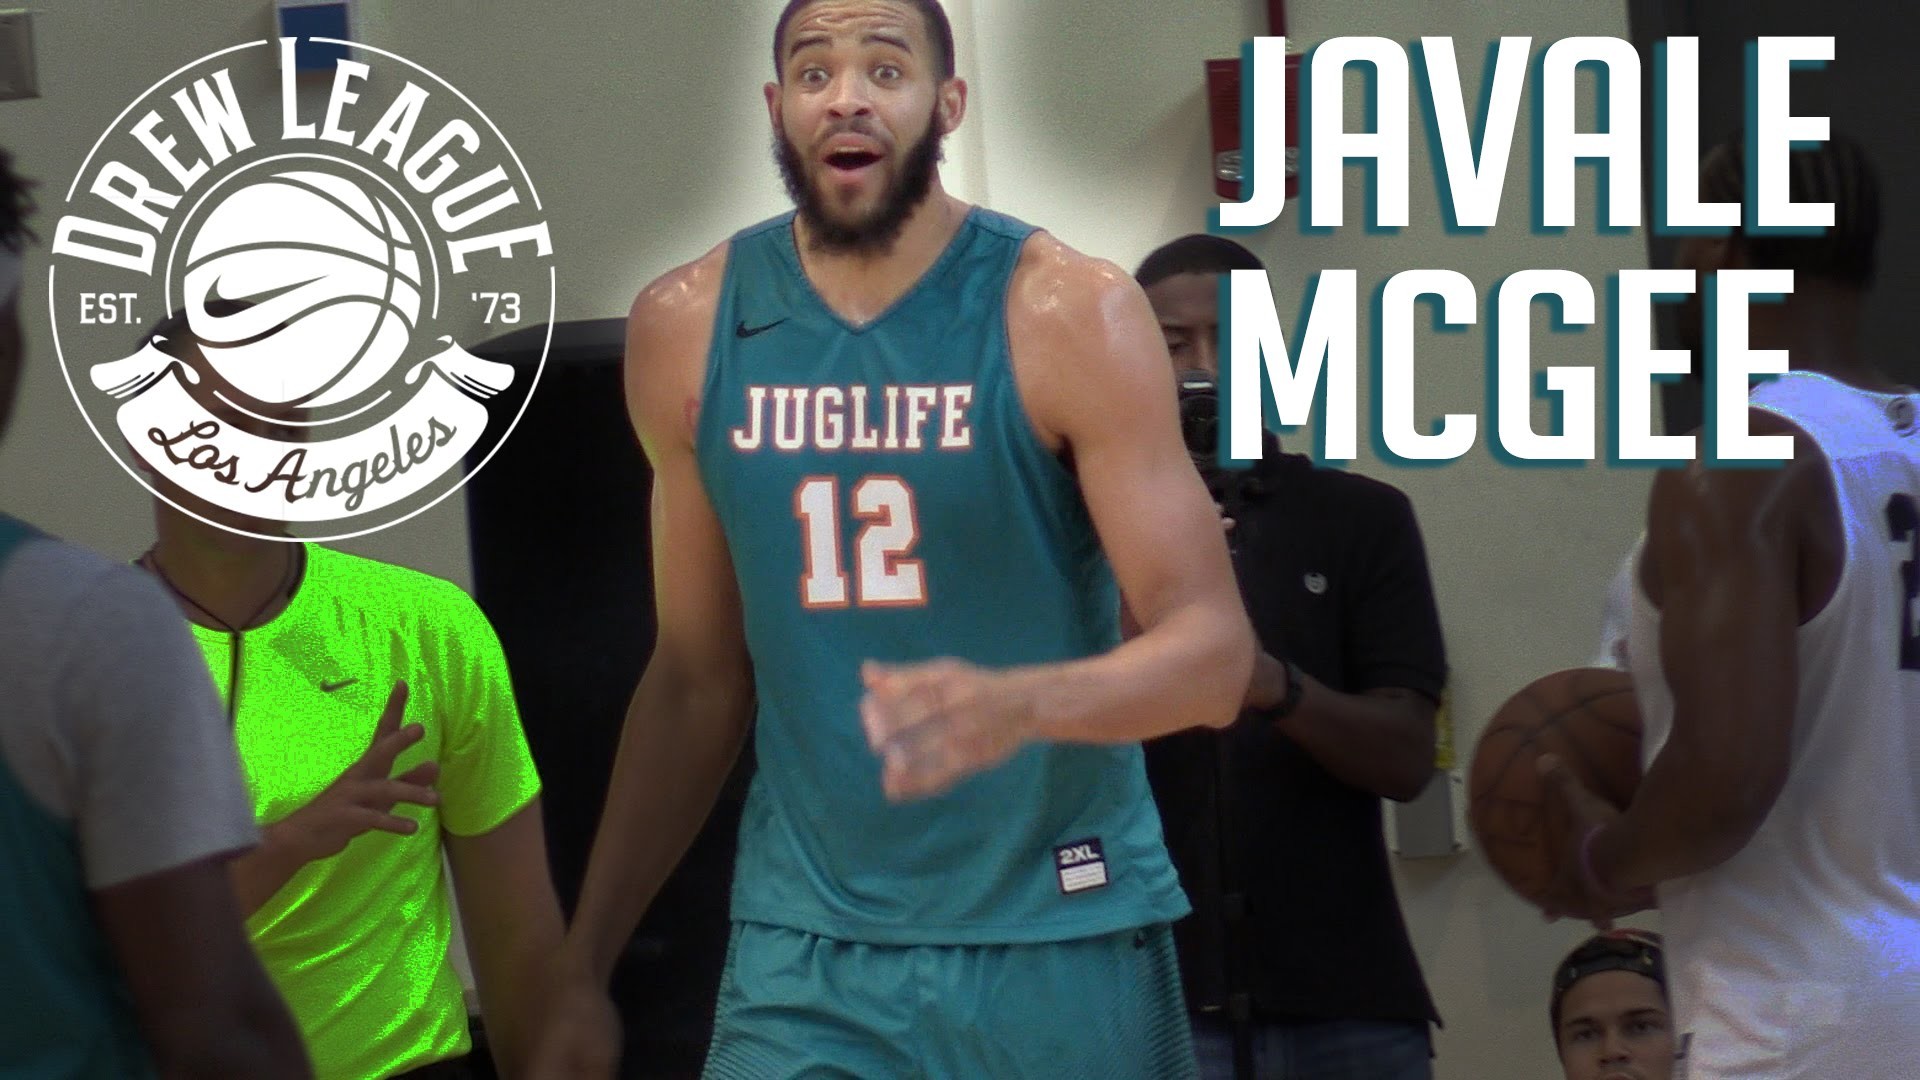 1920x1080 JaVale McGee Drew League Championship Highlights | JAVALE MCGEE!